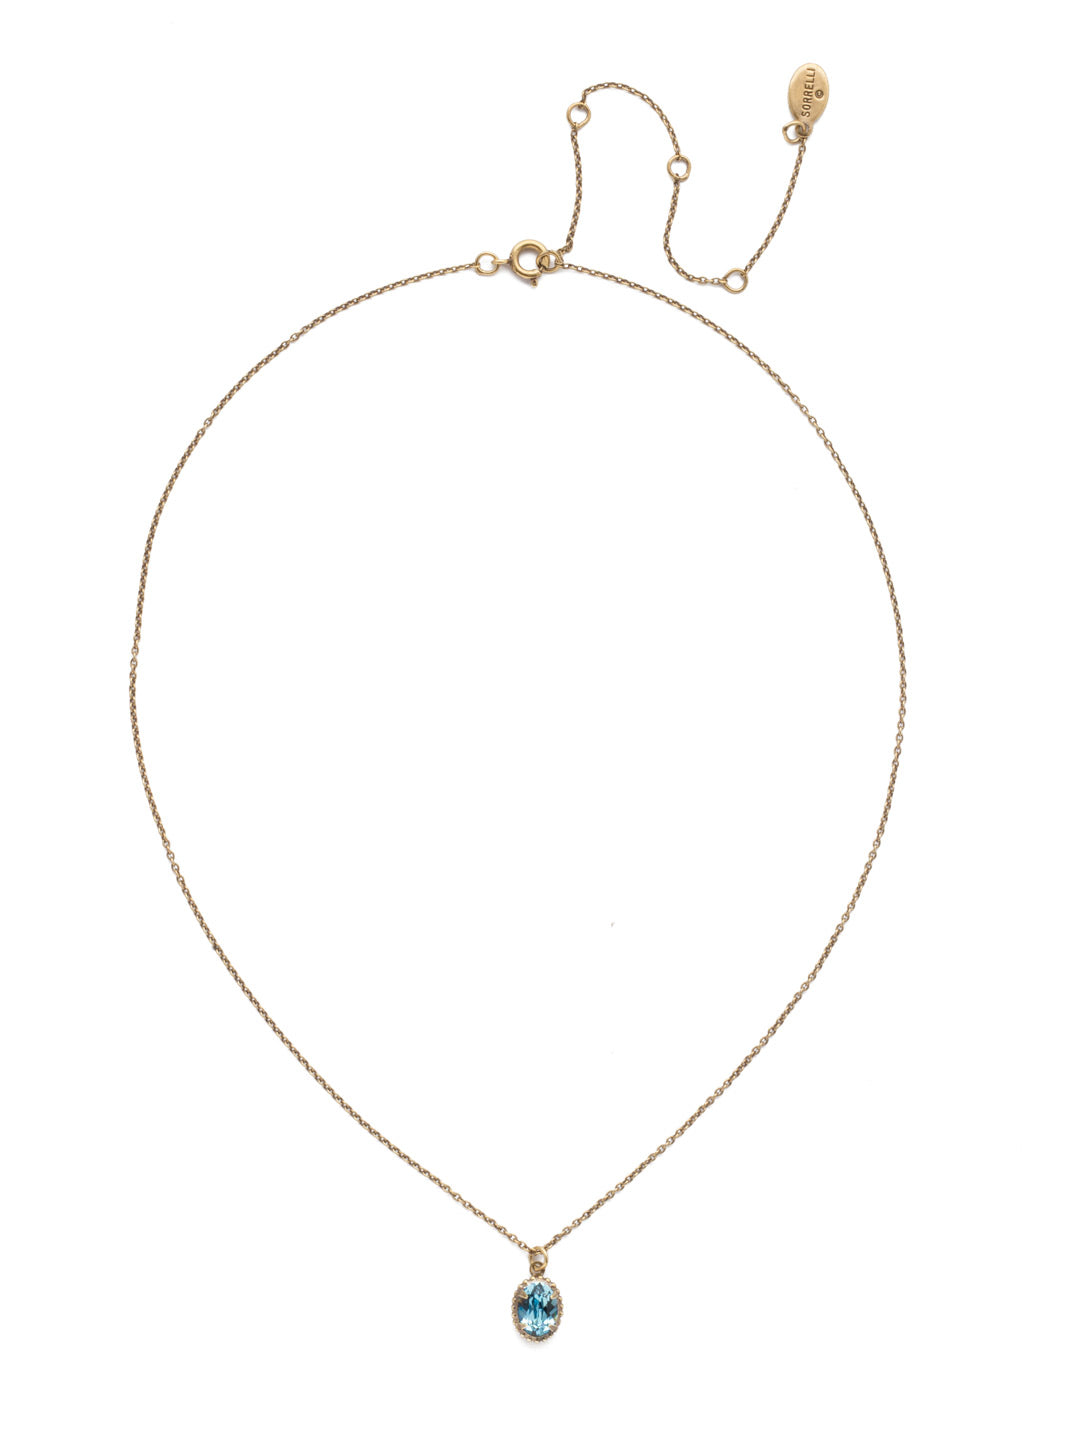 Maisie Pendant Necklace - NEF49AGAQU - <p>This is the perfect day-to-night sparkling tiny pendant necklace that has an adjustable chain to fit your neckline. From Sorrelli's Aquamarine collection in our Antique Gold-tone finish.</p>